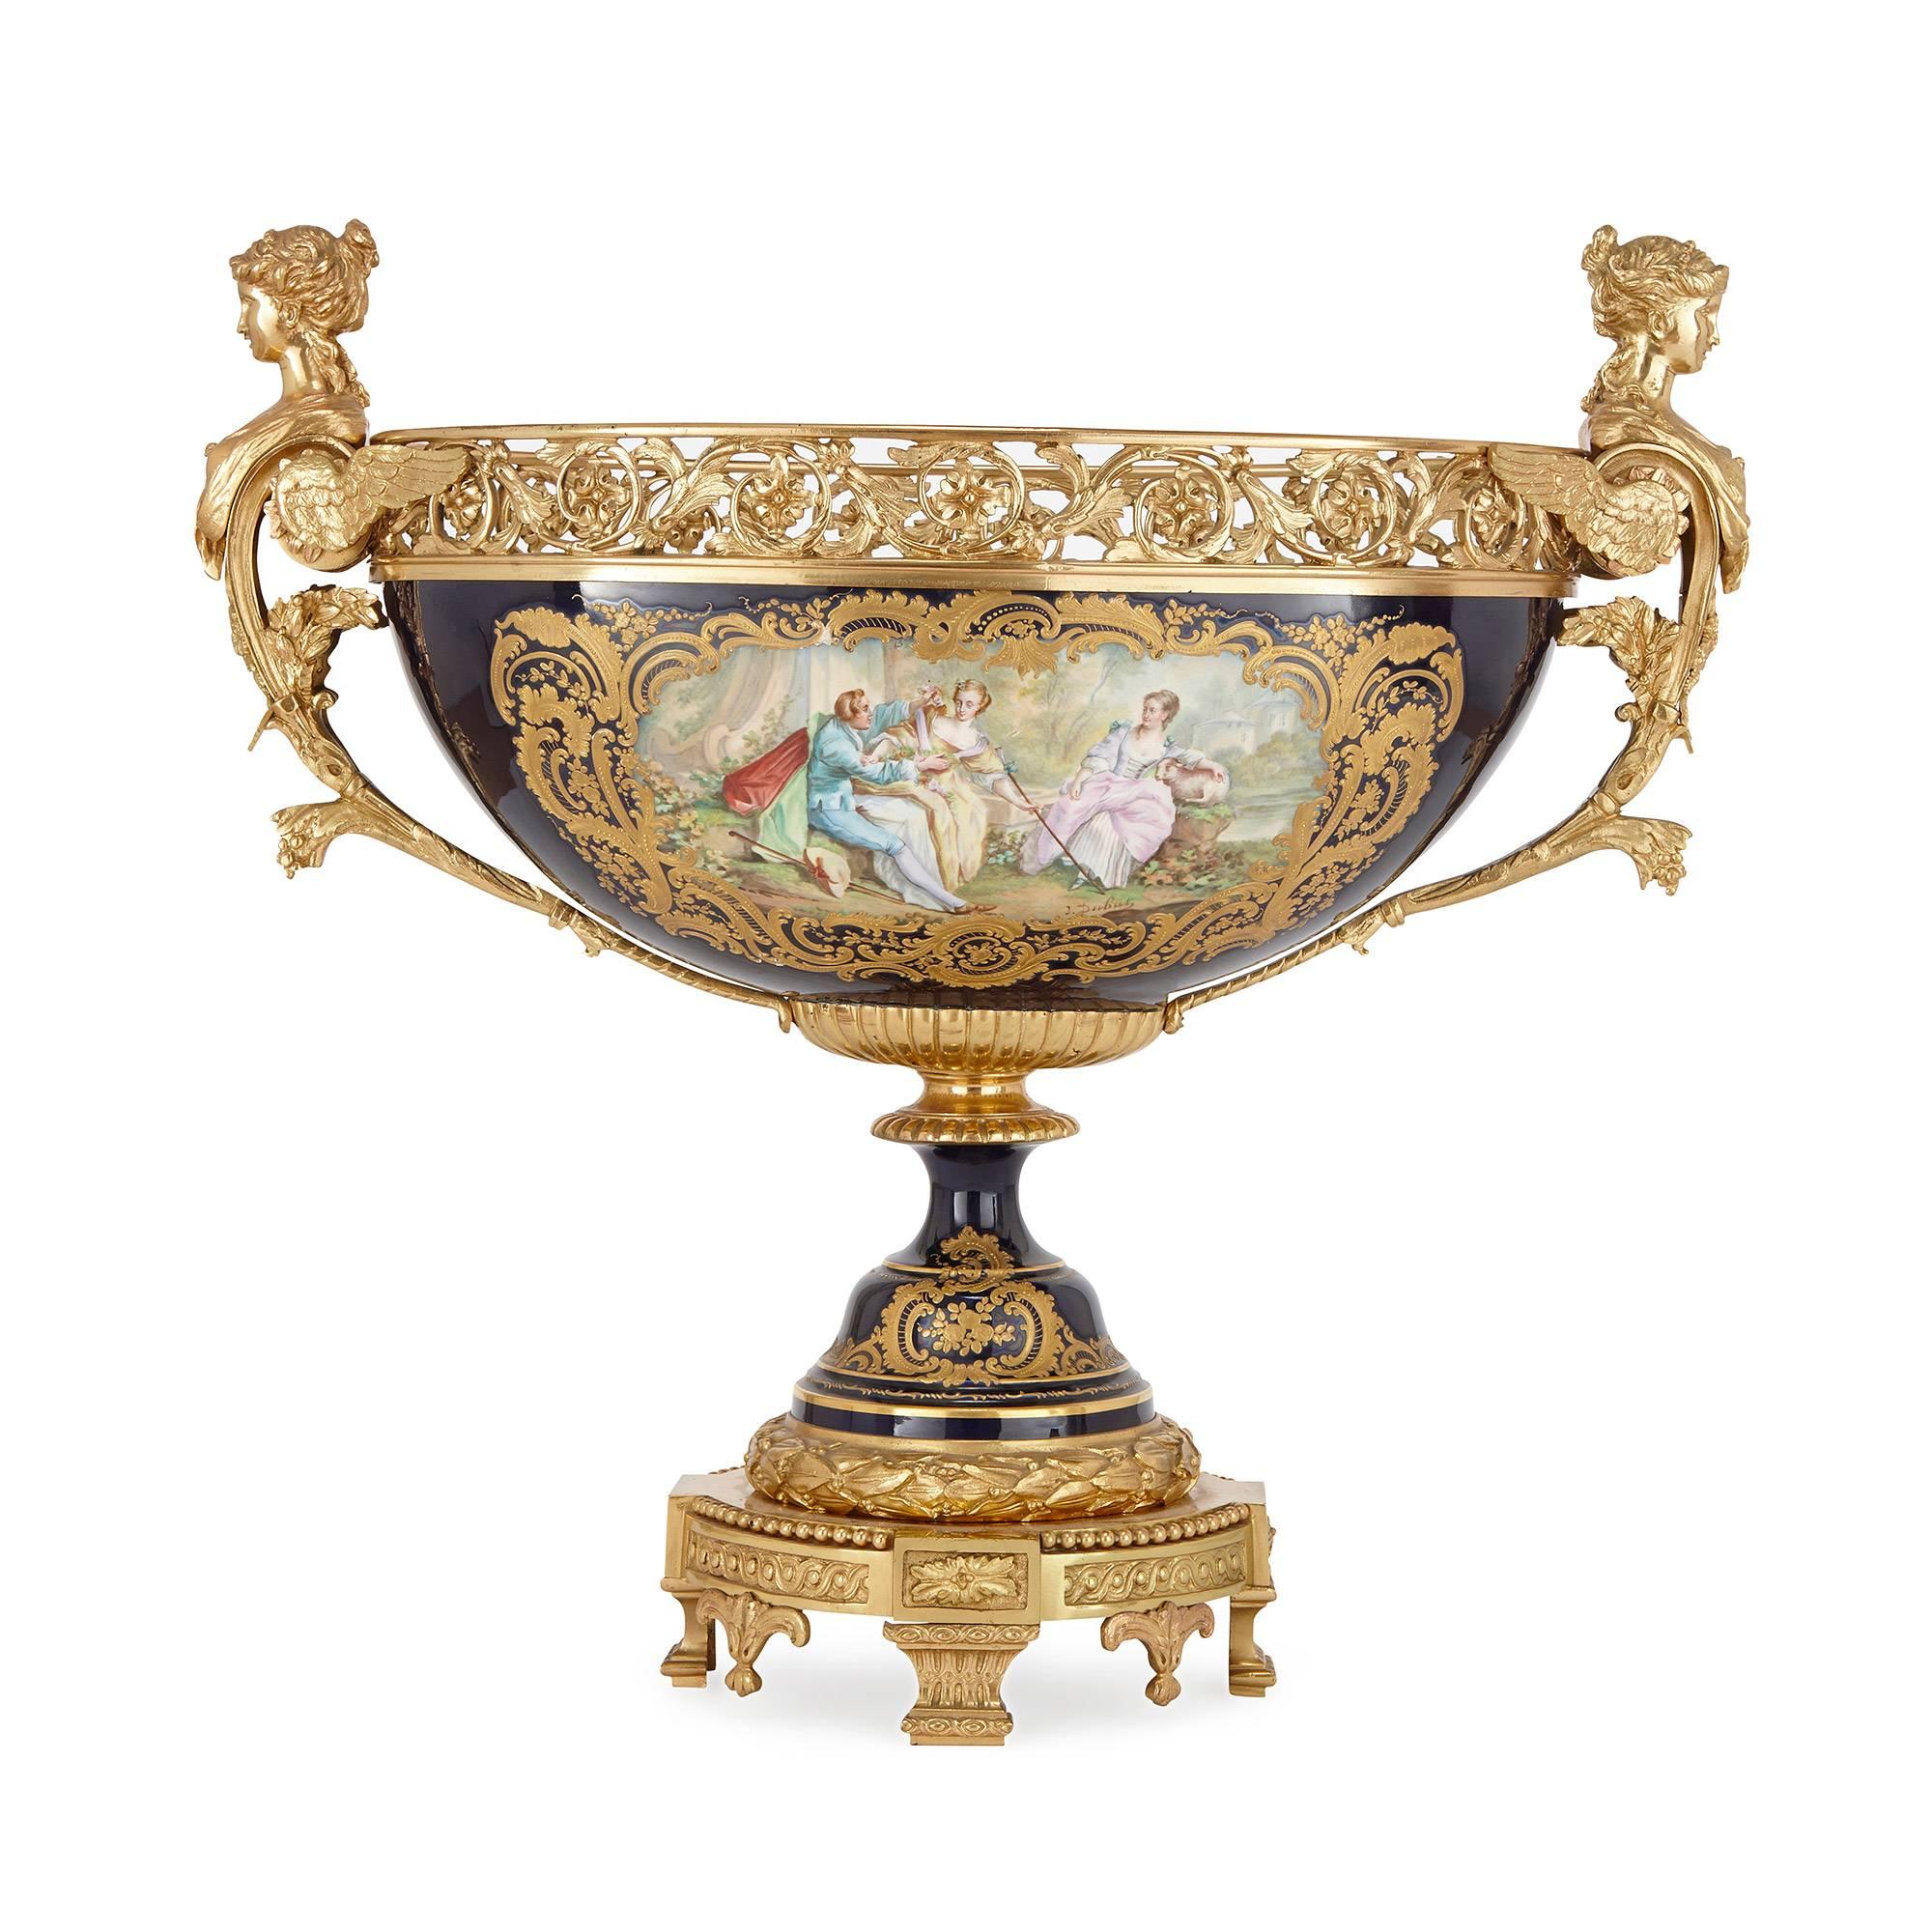 Each with domed cover surmounted by an ormolu pineapple finial, the body parcel-gilt on royal blue ground, painted with opposing figural scenes to the front signed 'J Dubut' and landscape scenes to the reverse, with twin ormolu caryatid form